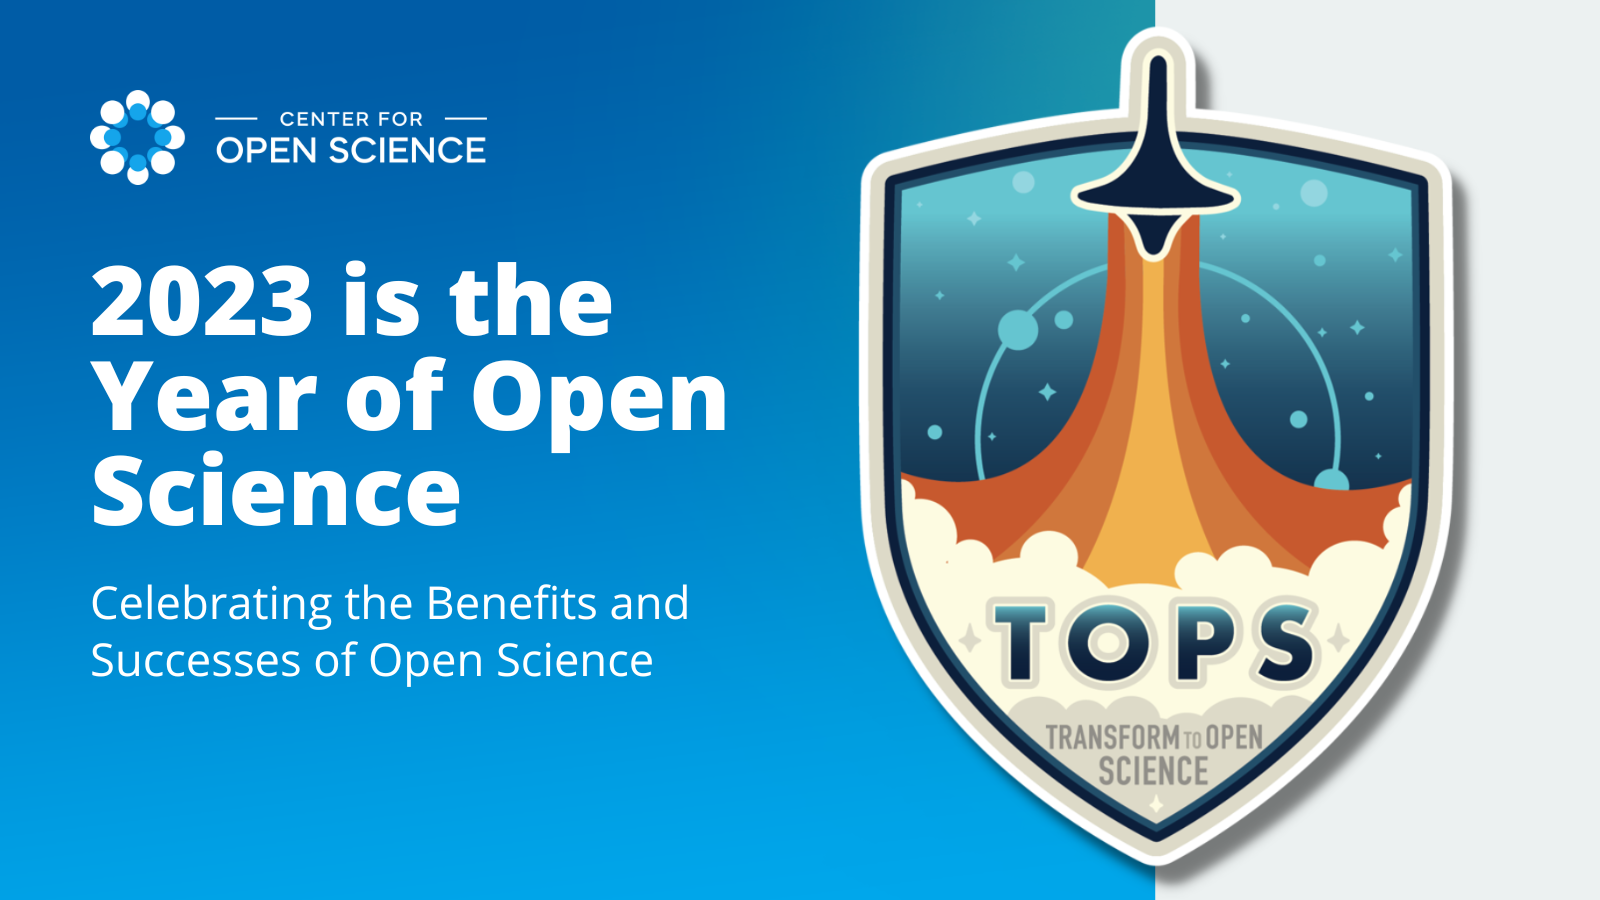 2023 is the Year of Open Science - Celebrate the Benefits and Successes of Open Science with NASA TOPS logo